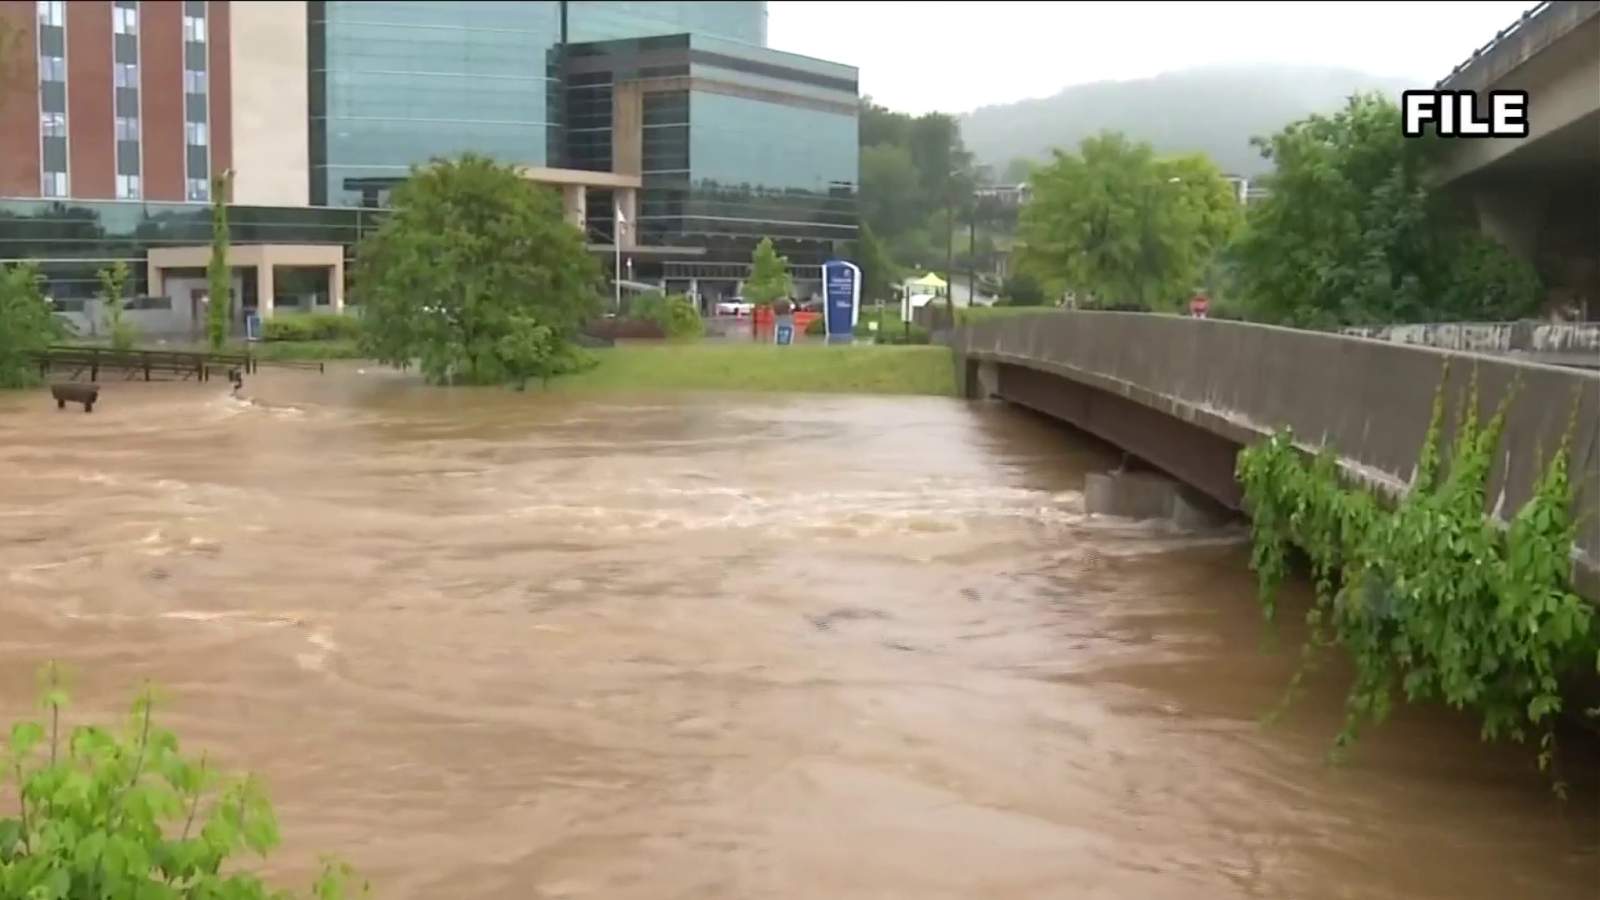 ‘It is not time to get out on the river’: Carilion Clinic warns of risk for flash flooding near Roanoke River